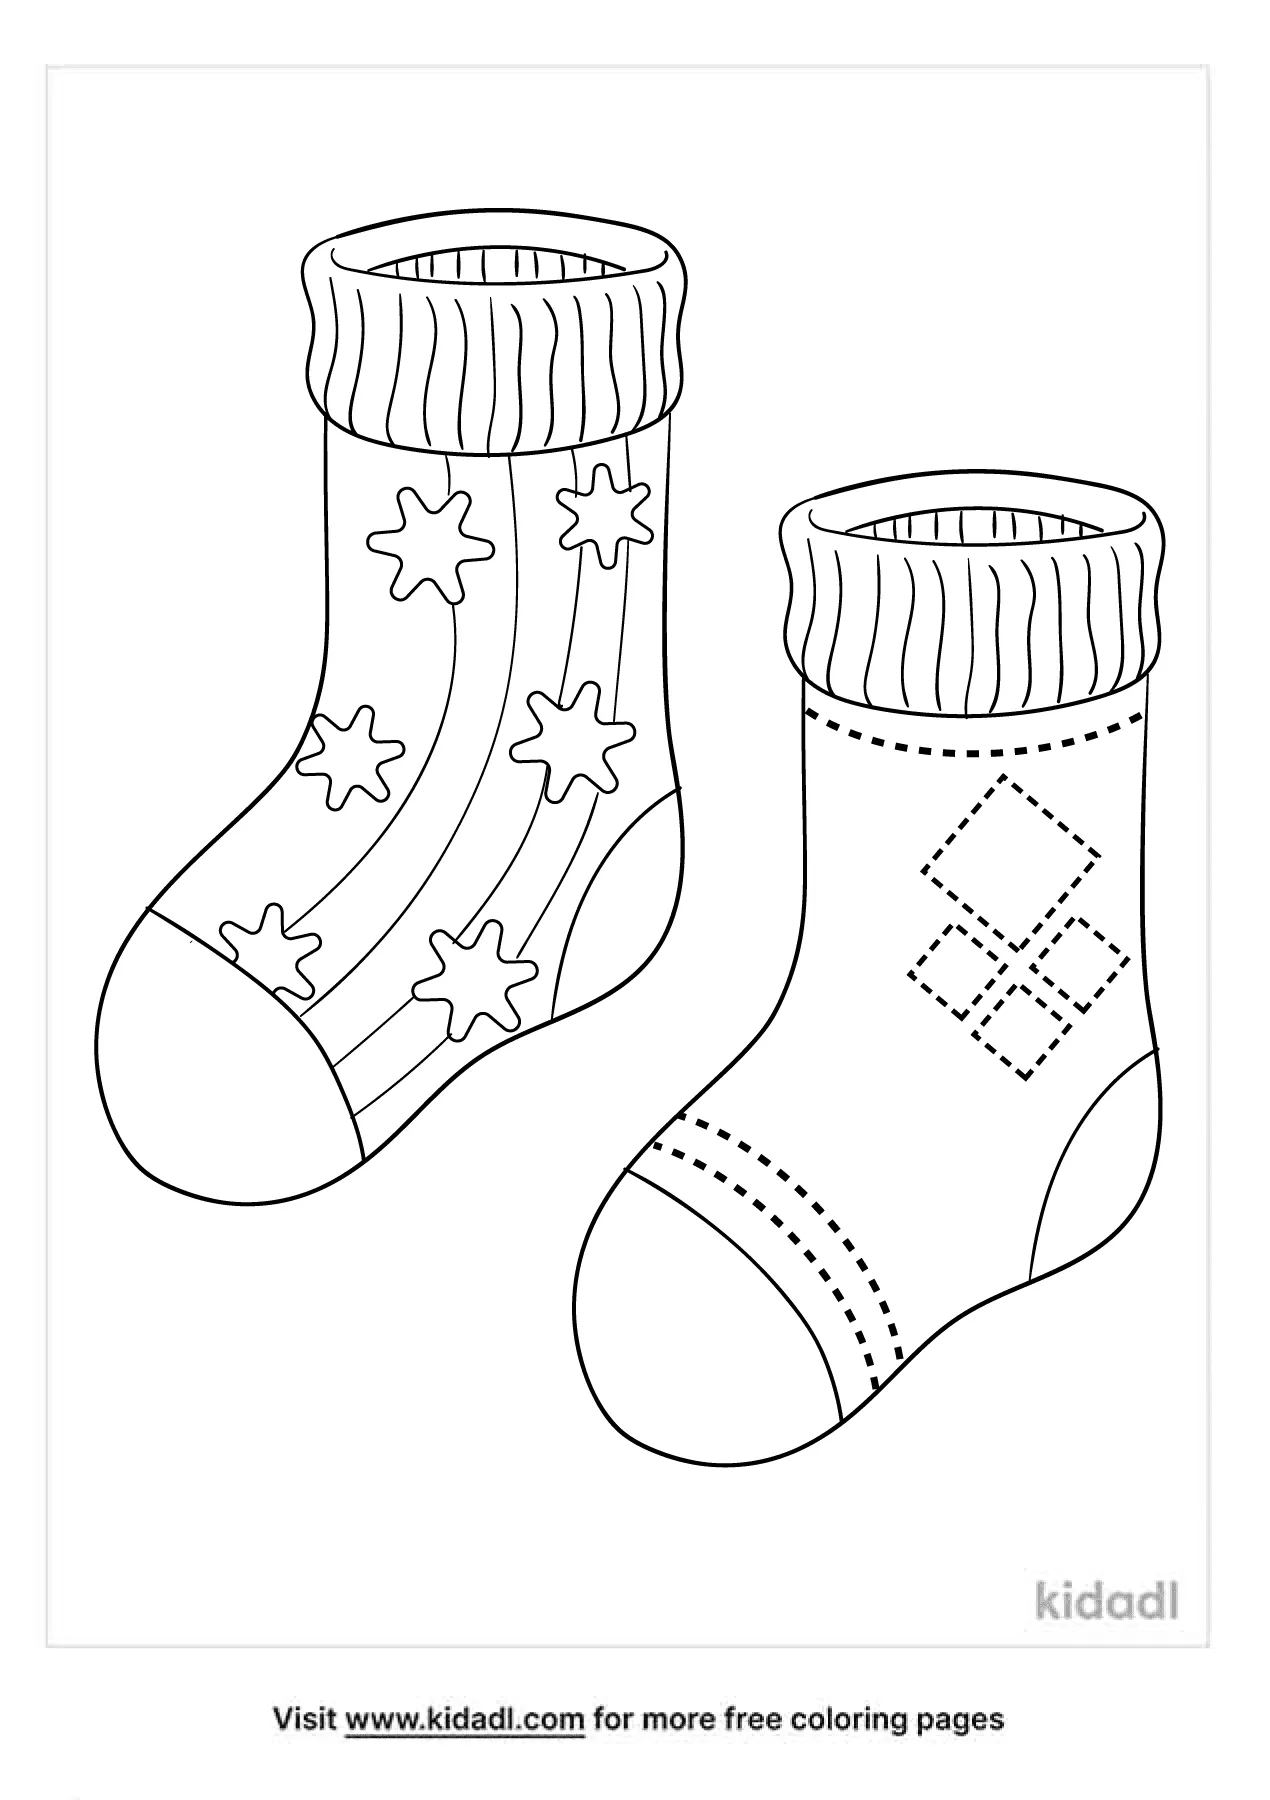 Sock Coloring Pages | Free Fashion Coloring Pages | Kidadl